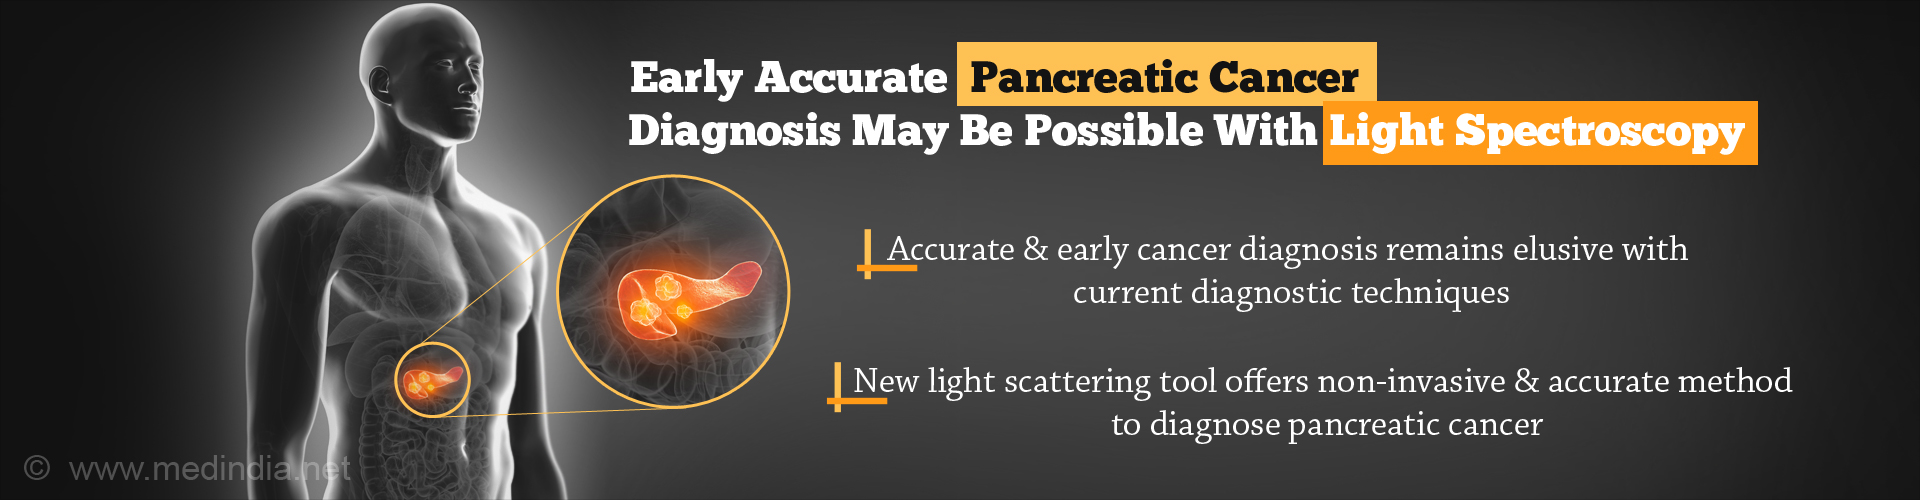 Early accurate pancreatic cancer diagnosis maybe possible with light spectroscopy
- Accurate & early cancer diagnosis remains elusive with current diagnostic techniques
- New light scattering tool offers non-invasive & accurate method to diagnose pancreatic cancer